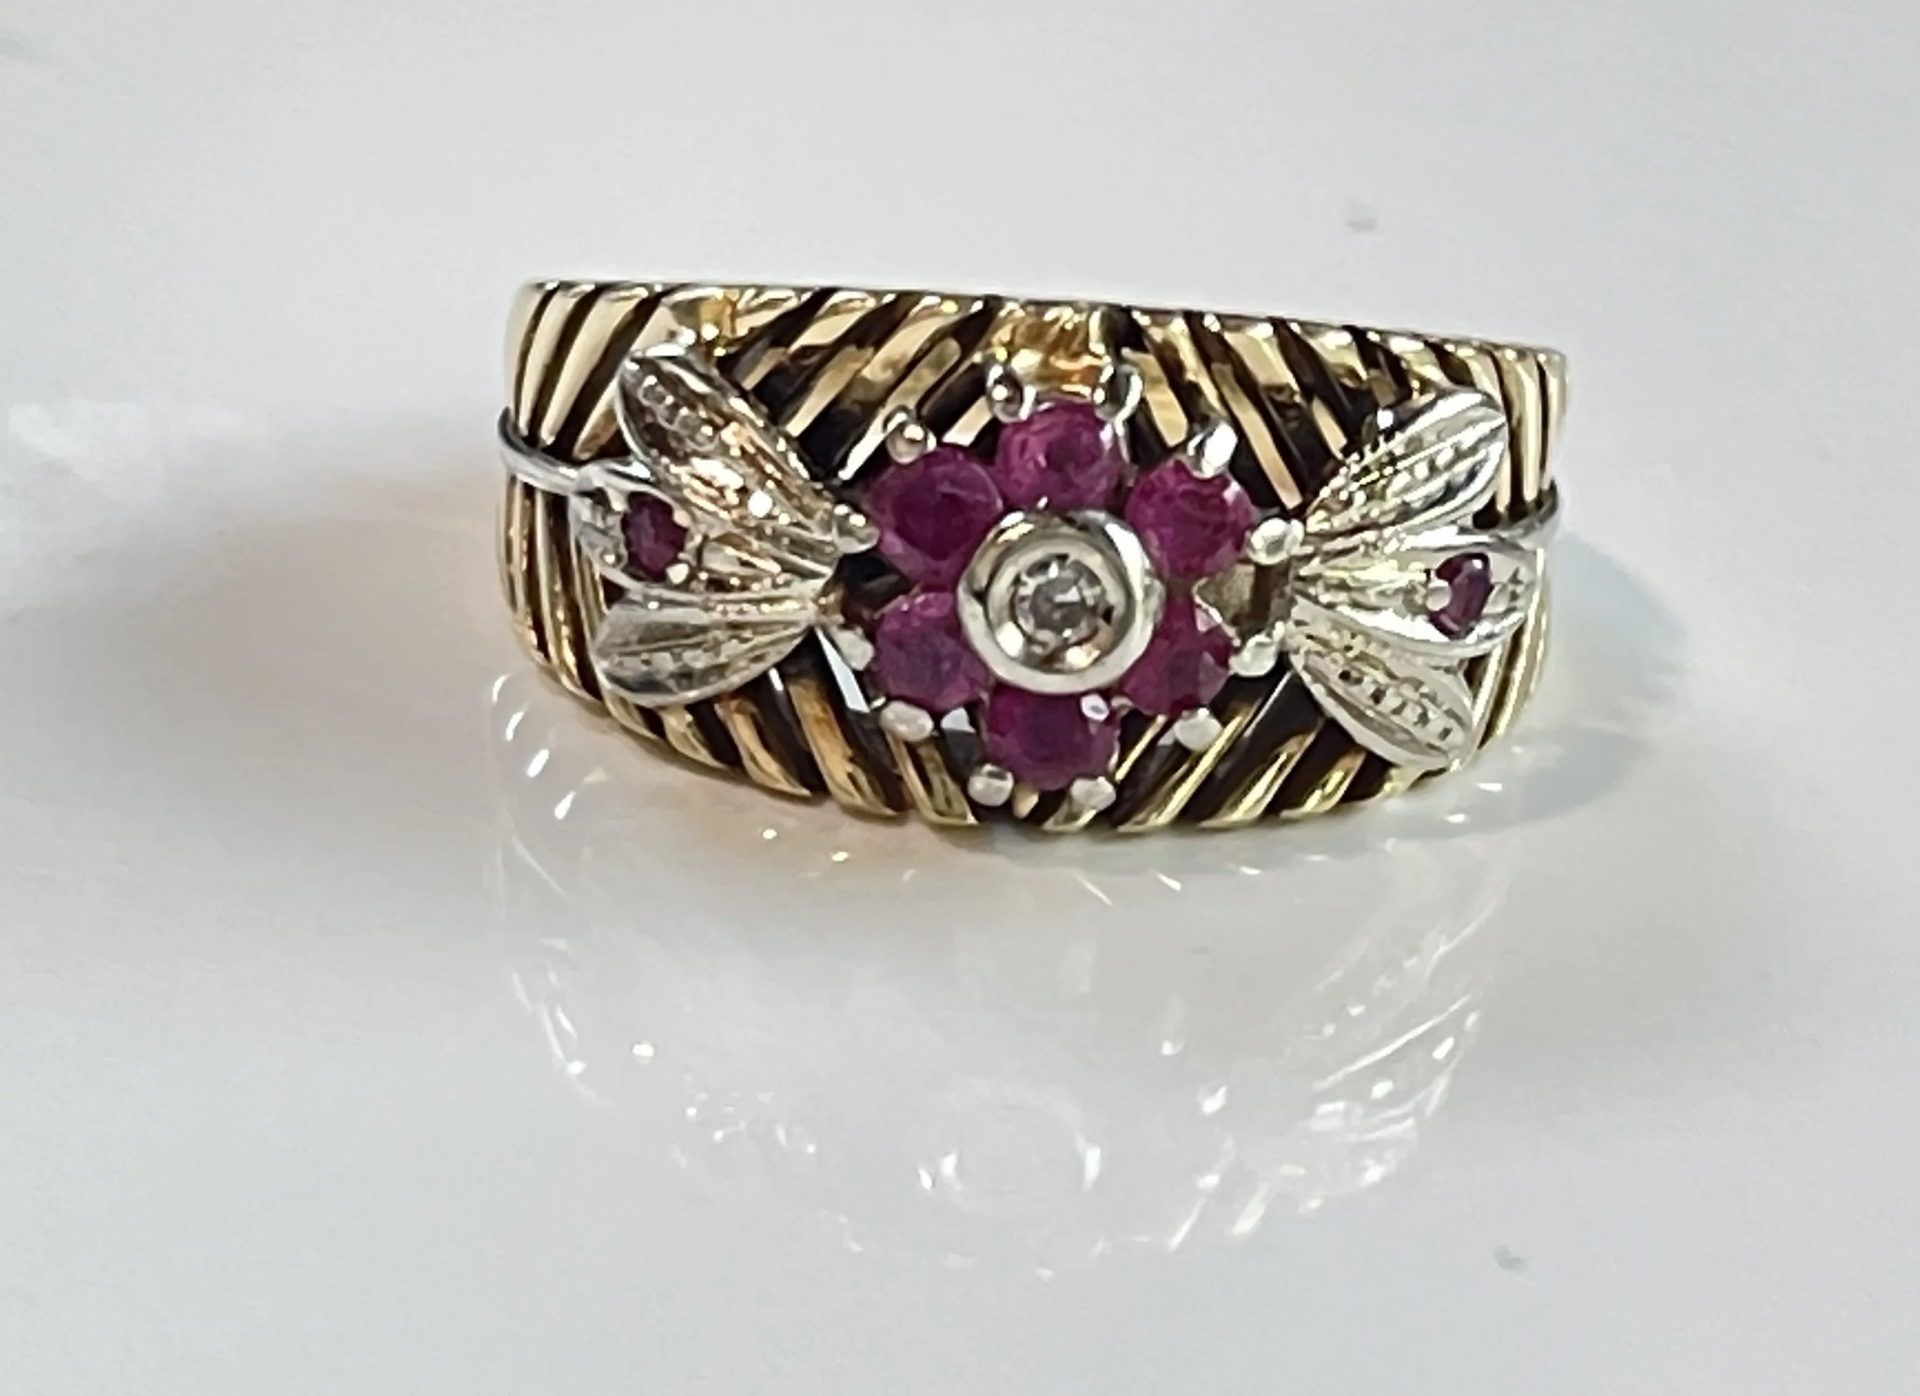 Vintage Rubies with Diamonds ring, 18ct. gold